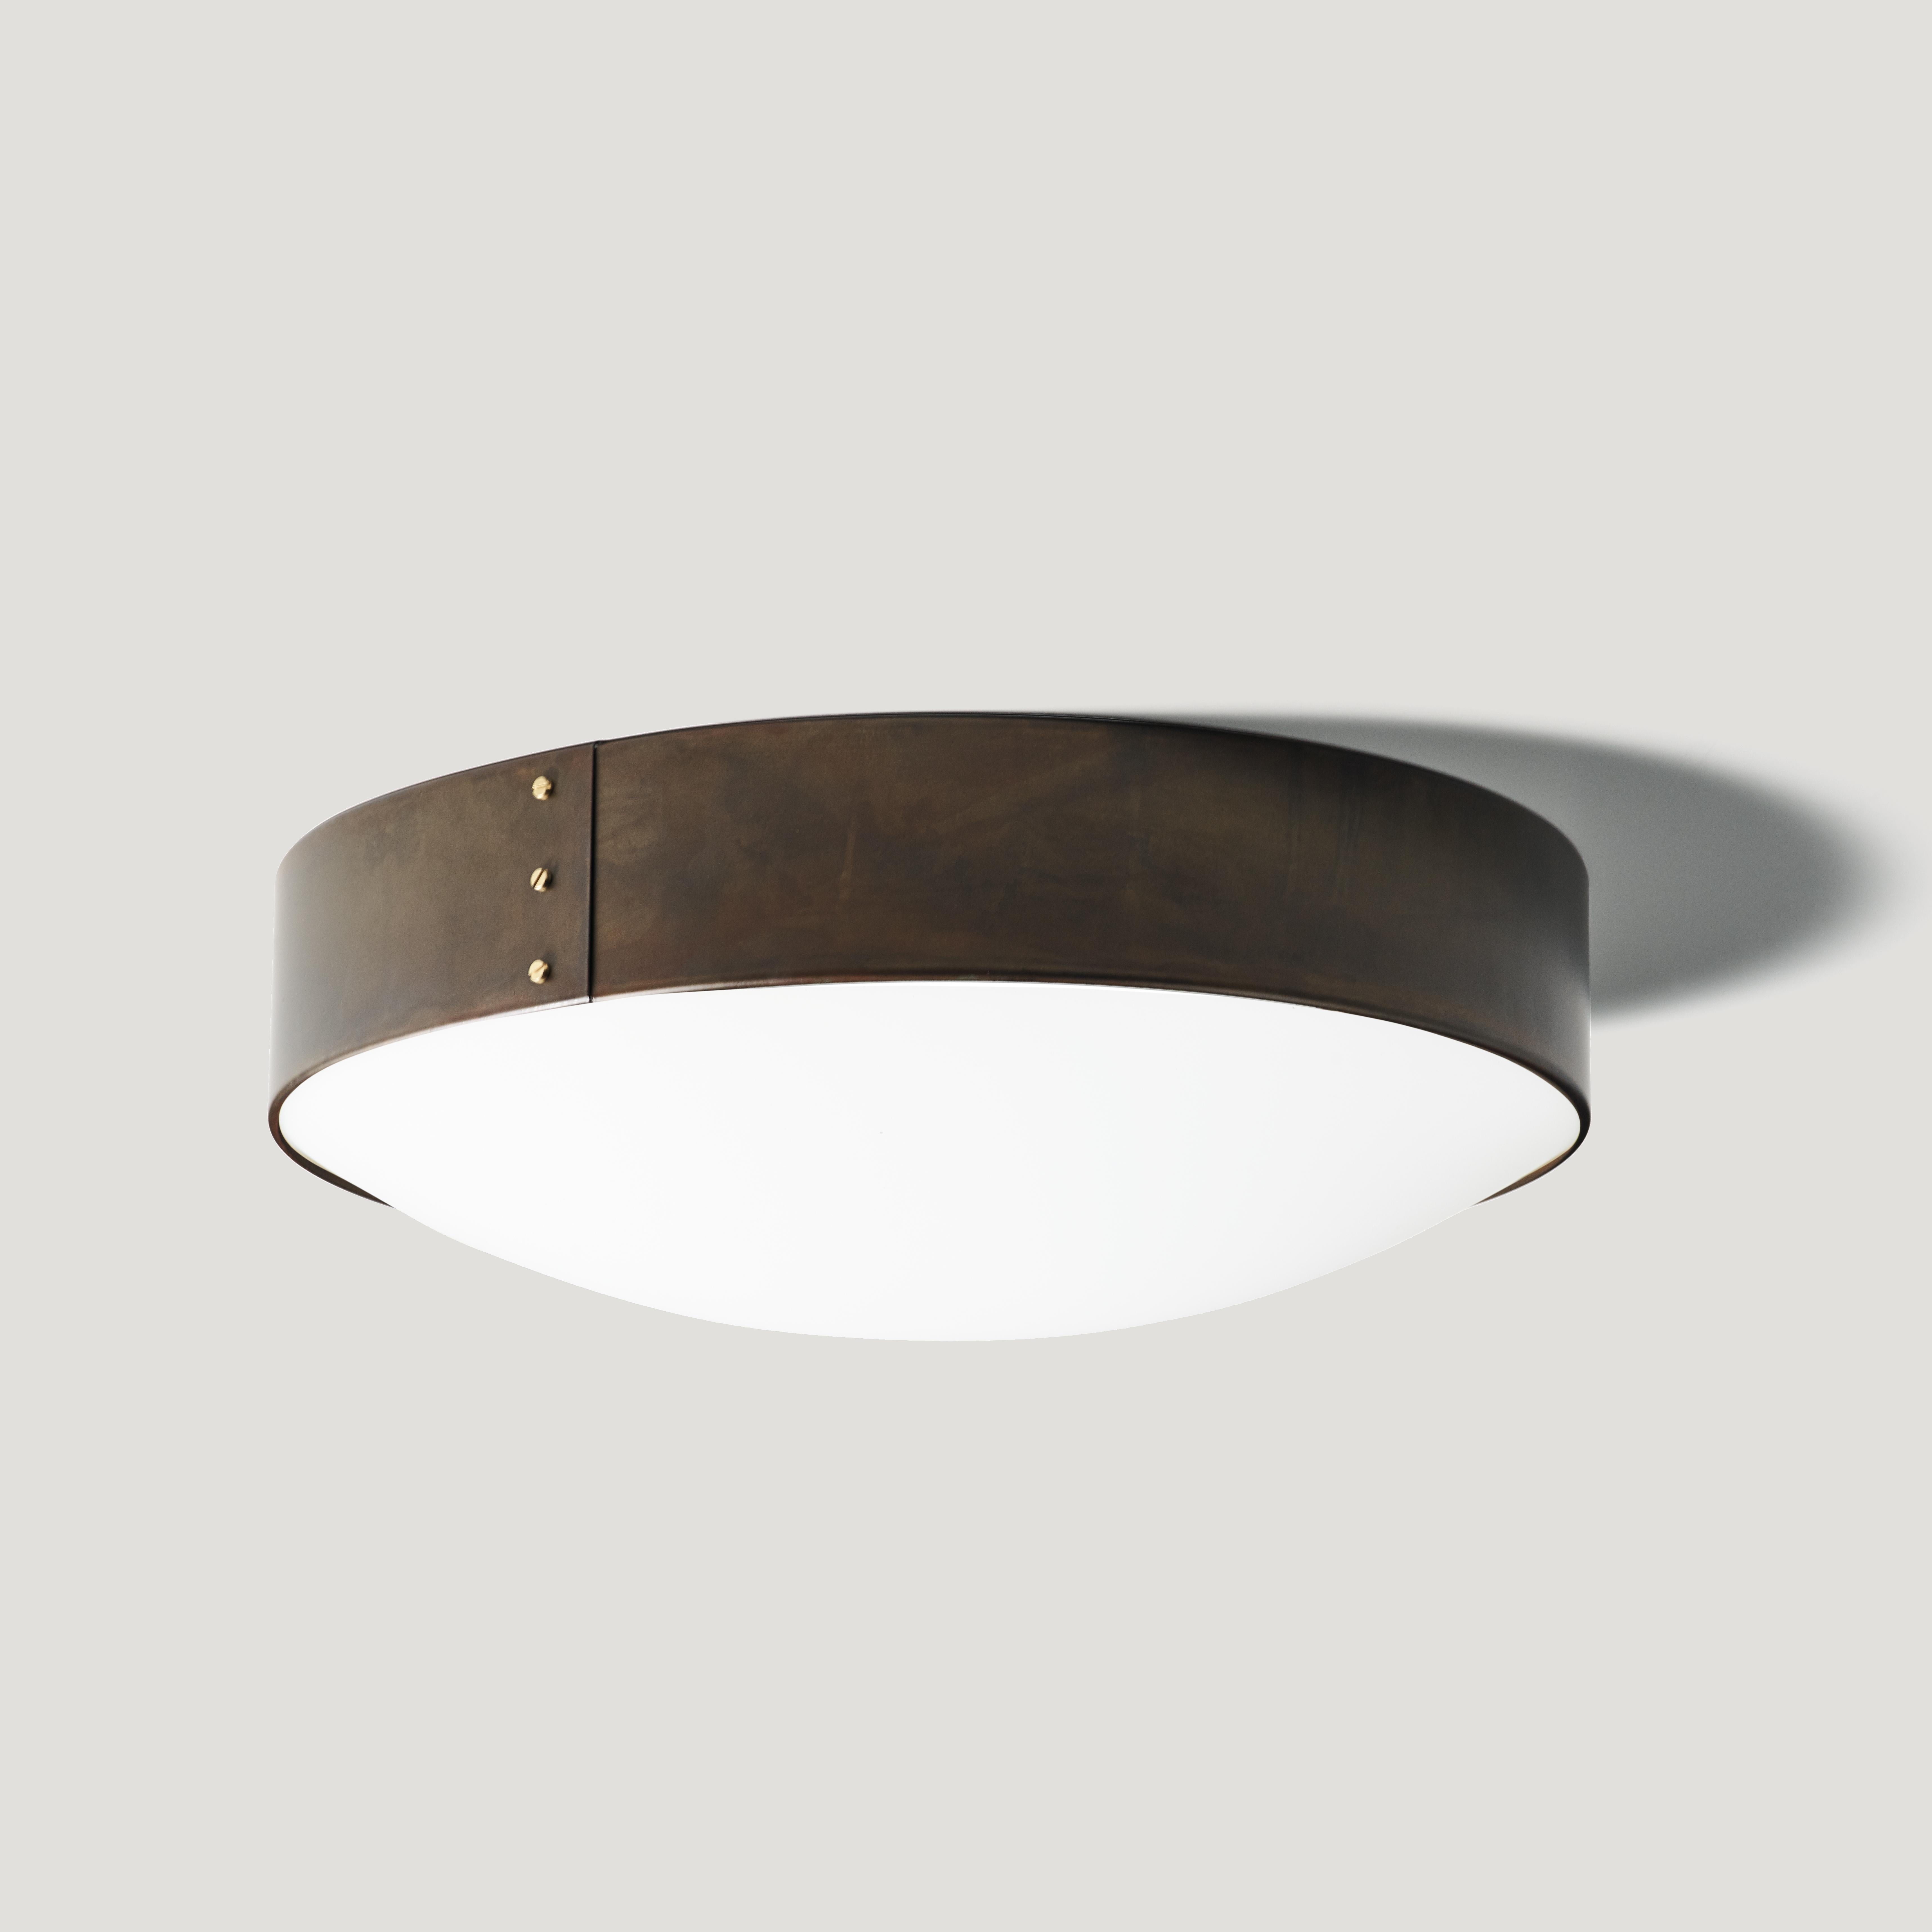 Celling Lamp designed and manufactured by Konsthantverk in Sweden.

3806-6 SVEP
Diameter 450 mm
Height 180 mm
Max 3 x 40 W E14
3806-12 Iron oxide/opal acrylic

The lamps are wiring with standard Europe wiring.

Svep is a ceiling from Konsthantverk